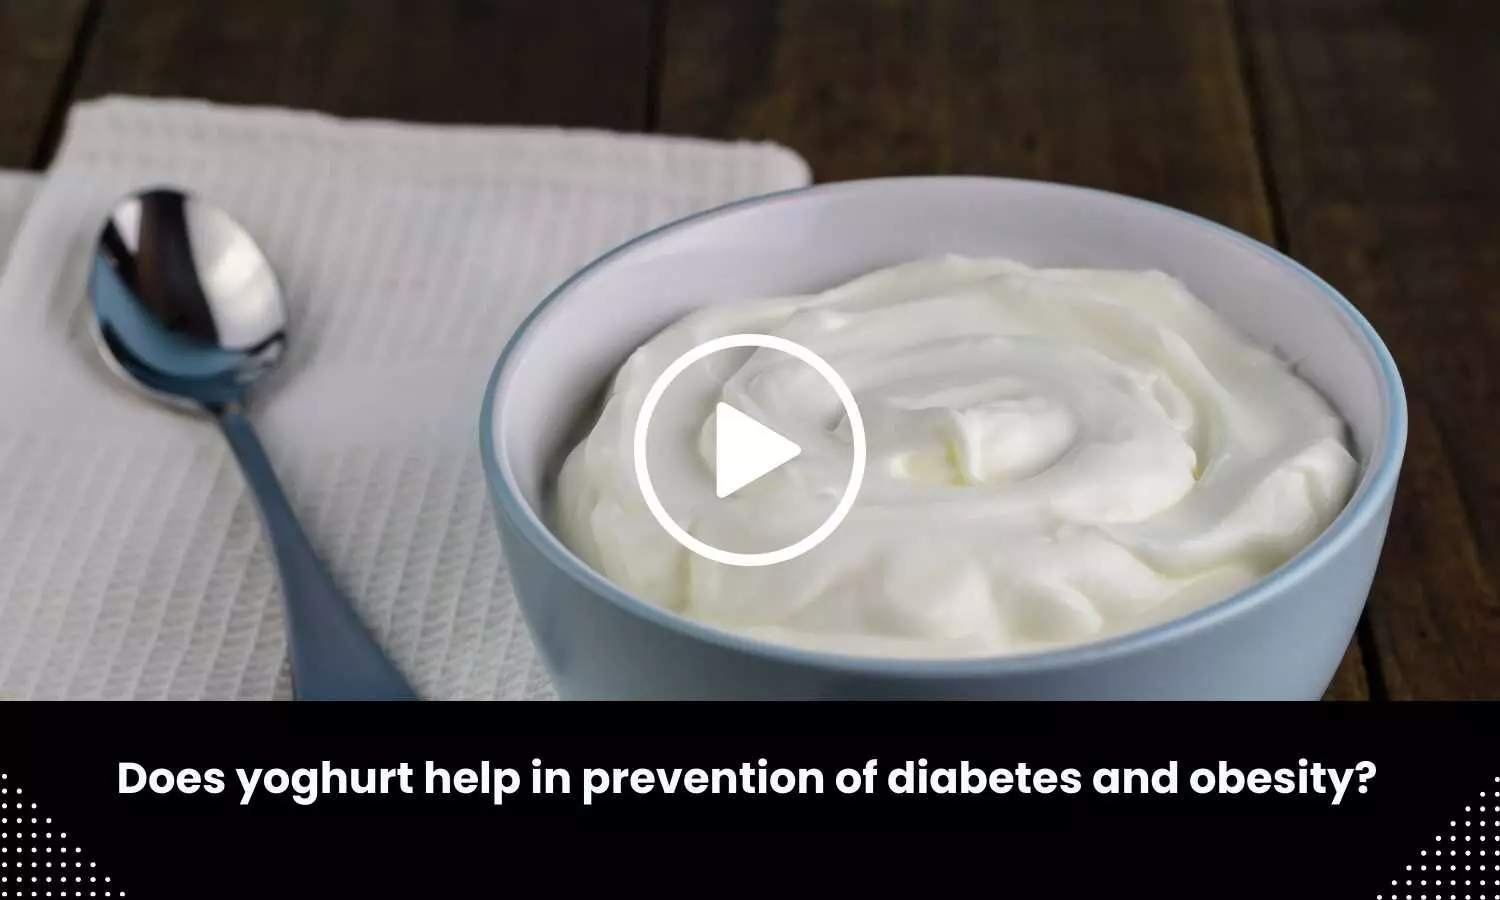 Does yoghurt help in prevention of diabetes and obesity?